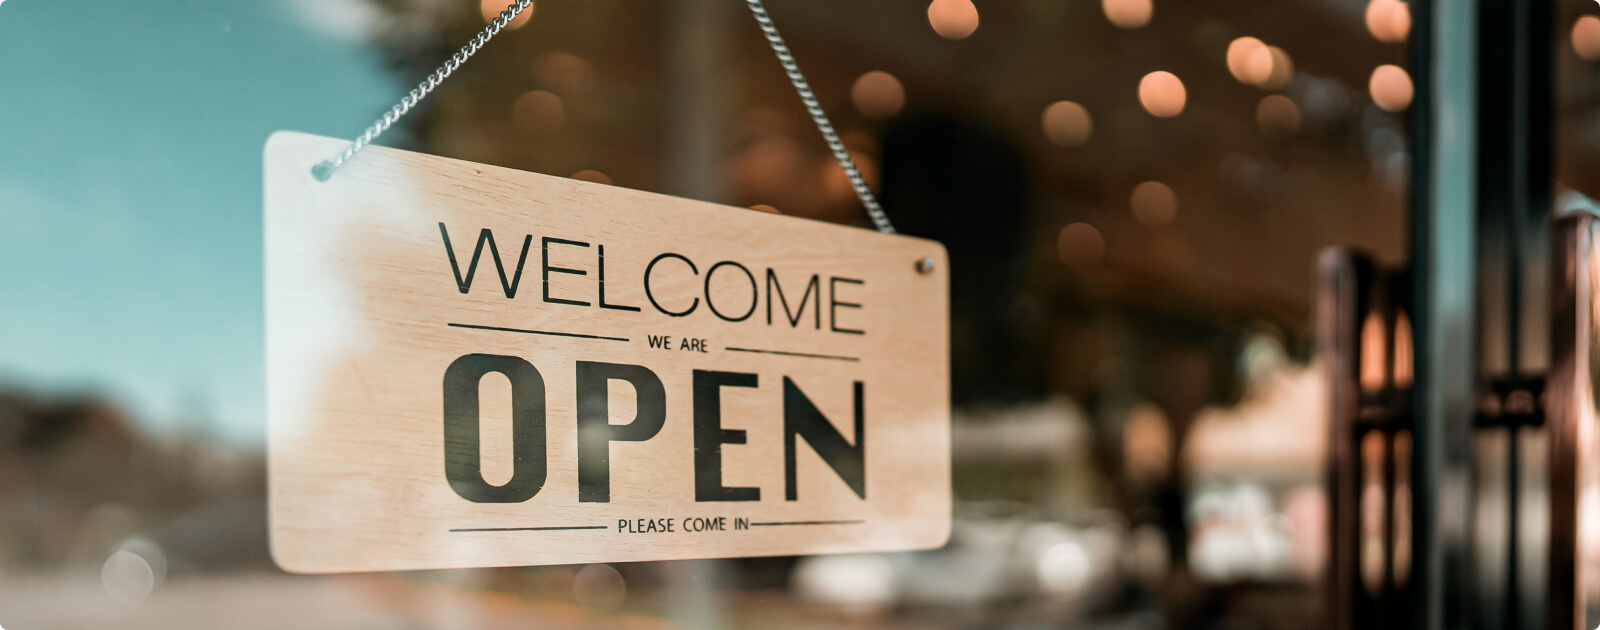 A sign hanging in a window that reads "Welcome, we are open. Please come in."